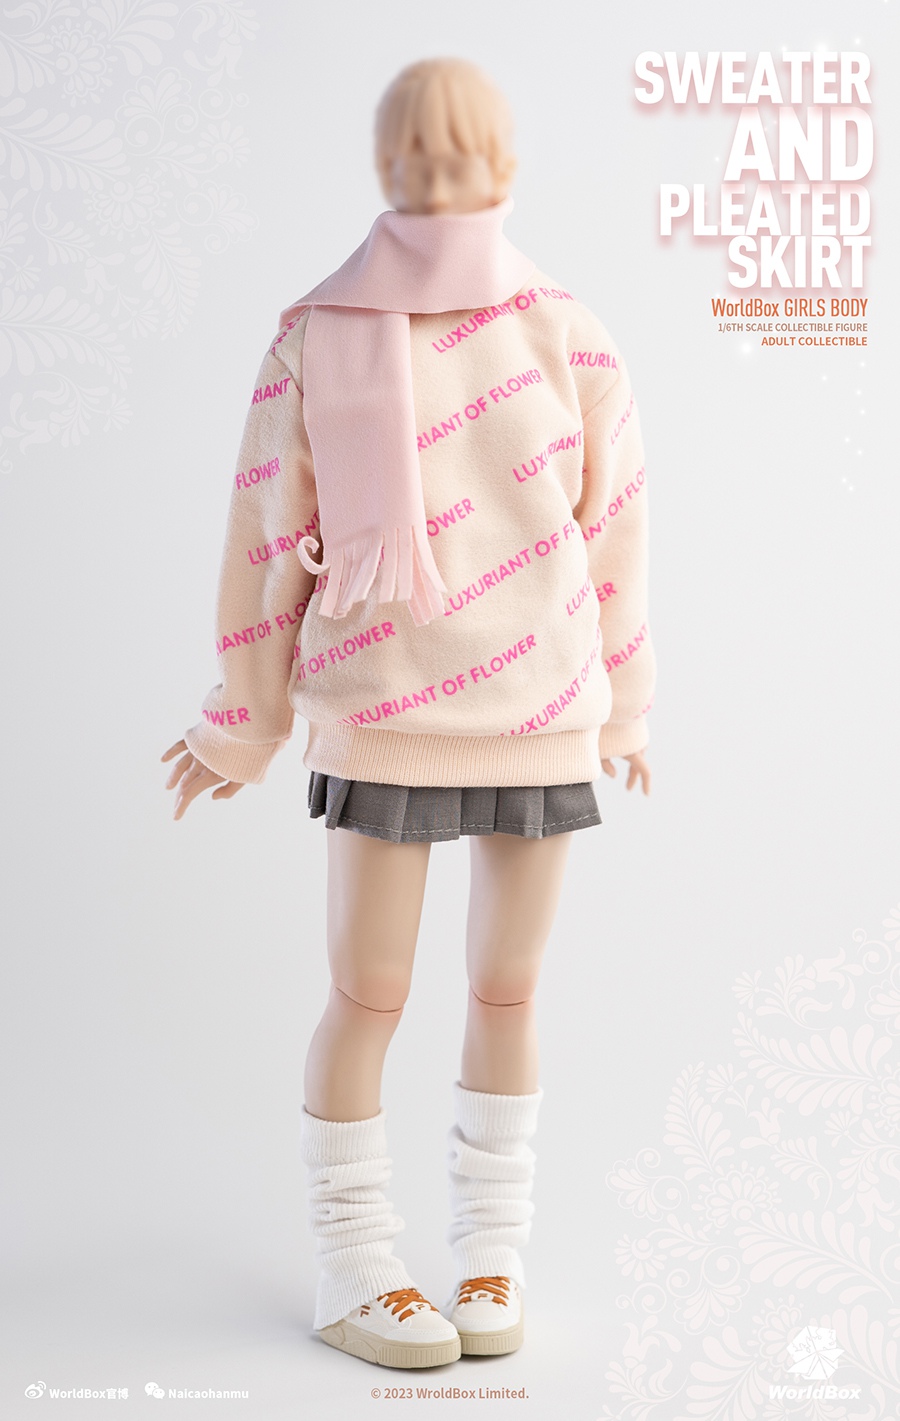 Clothing - NEW PRODUCT: Worldbox - clothing tag - "Winter Girl" 0393